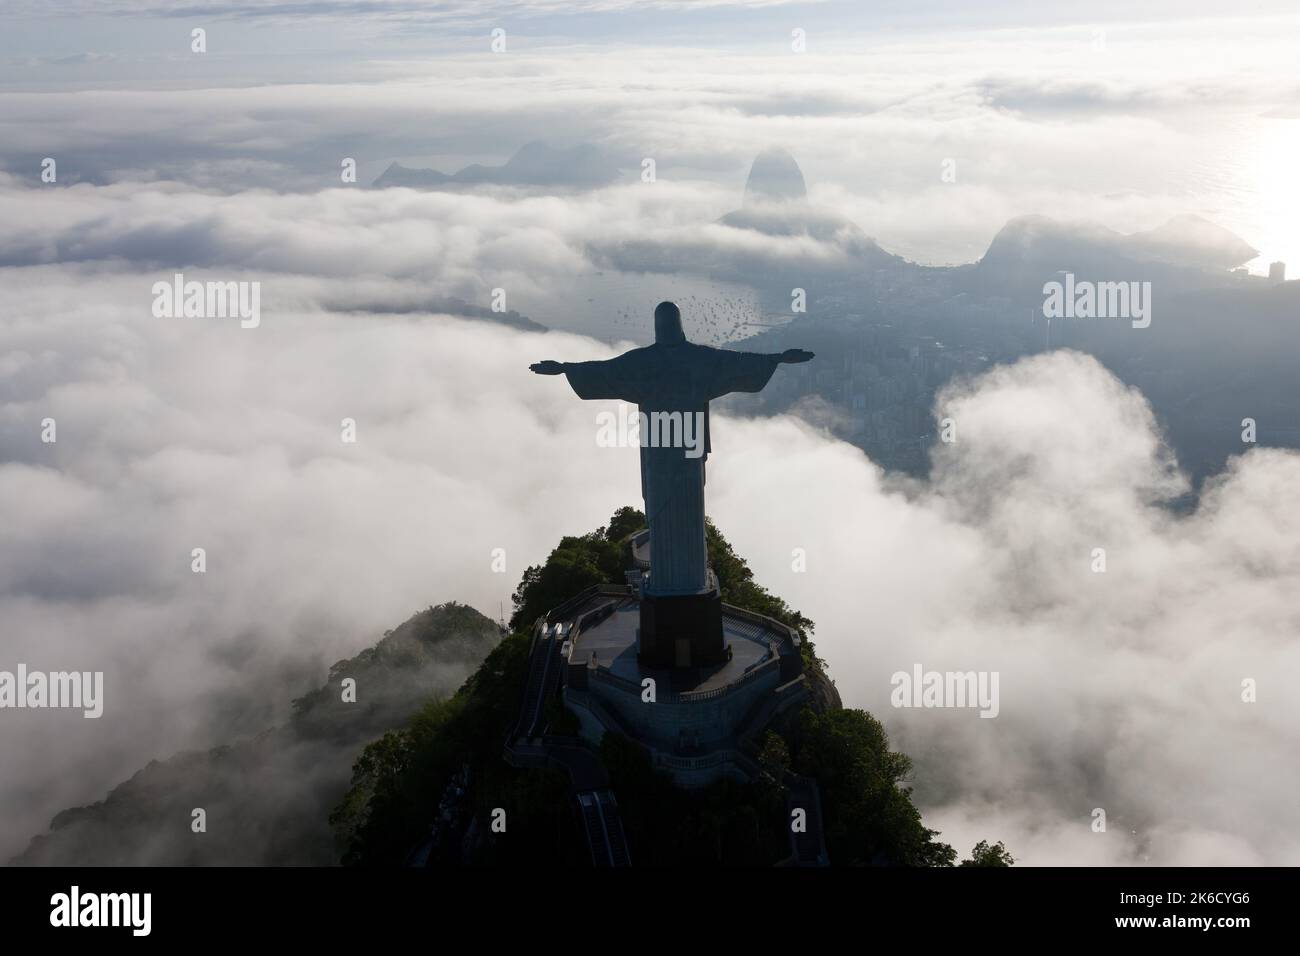 The giant Art Deco statue of Jesus, known as Christ the Redeemer. Situated on Corcovado mountain in Rio de Janeiro, Brazil. The statue is 125 feet tal Stock Photo